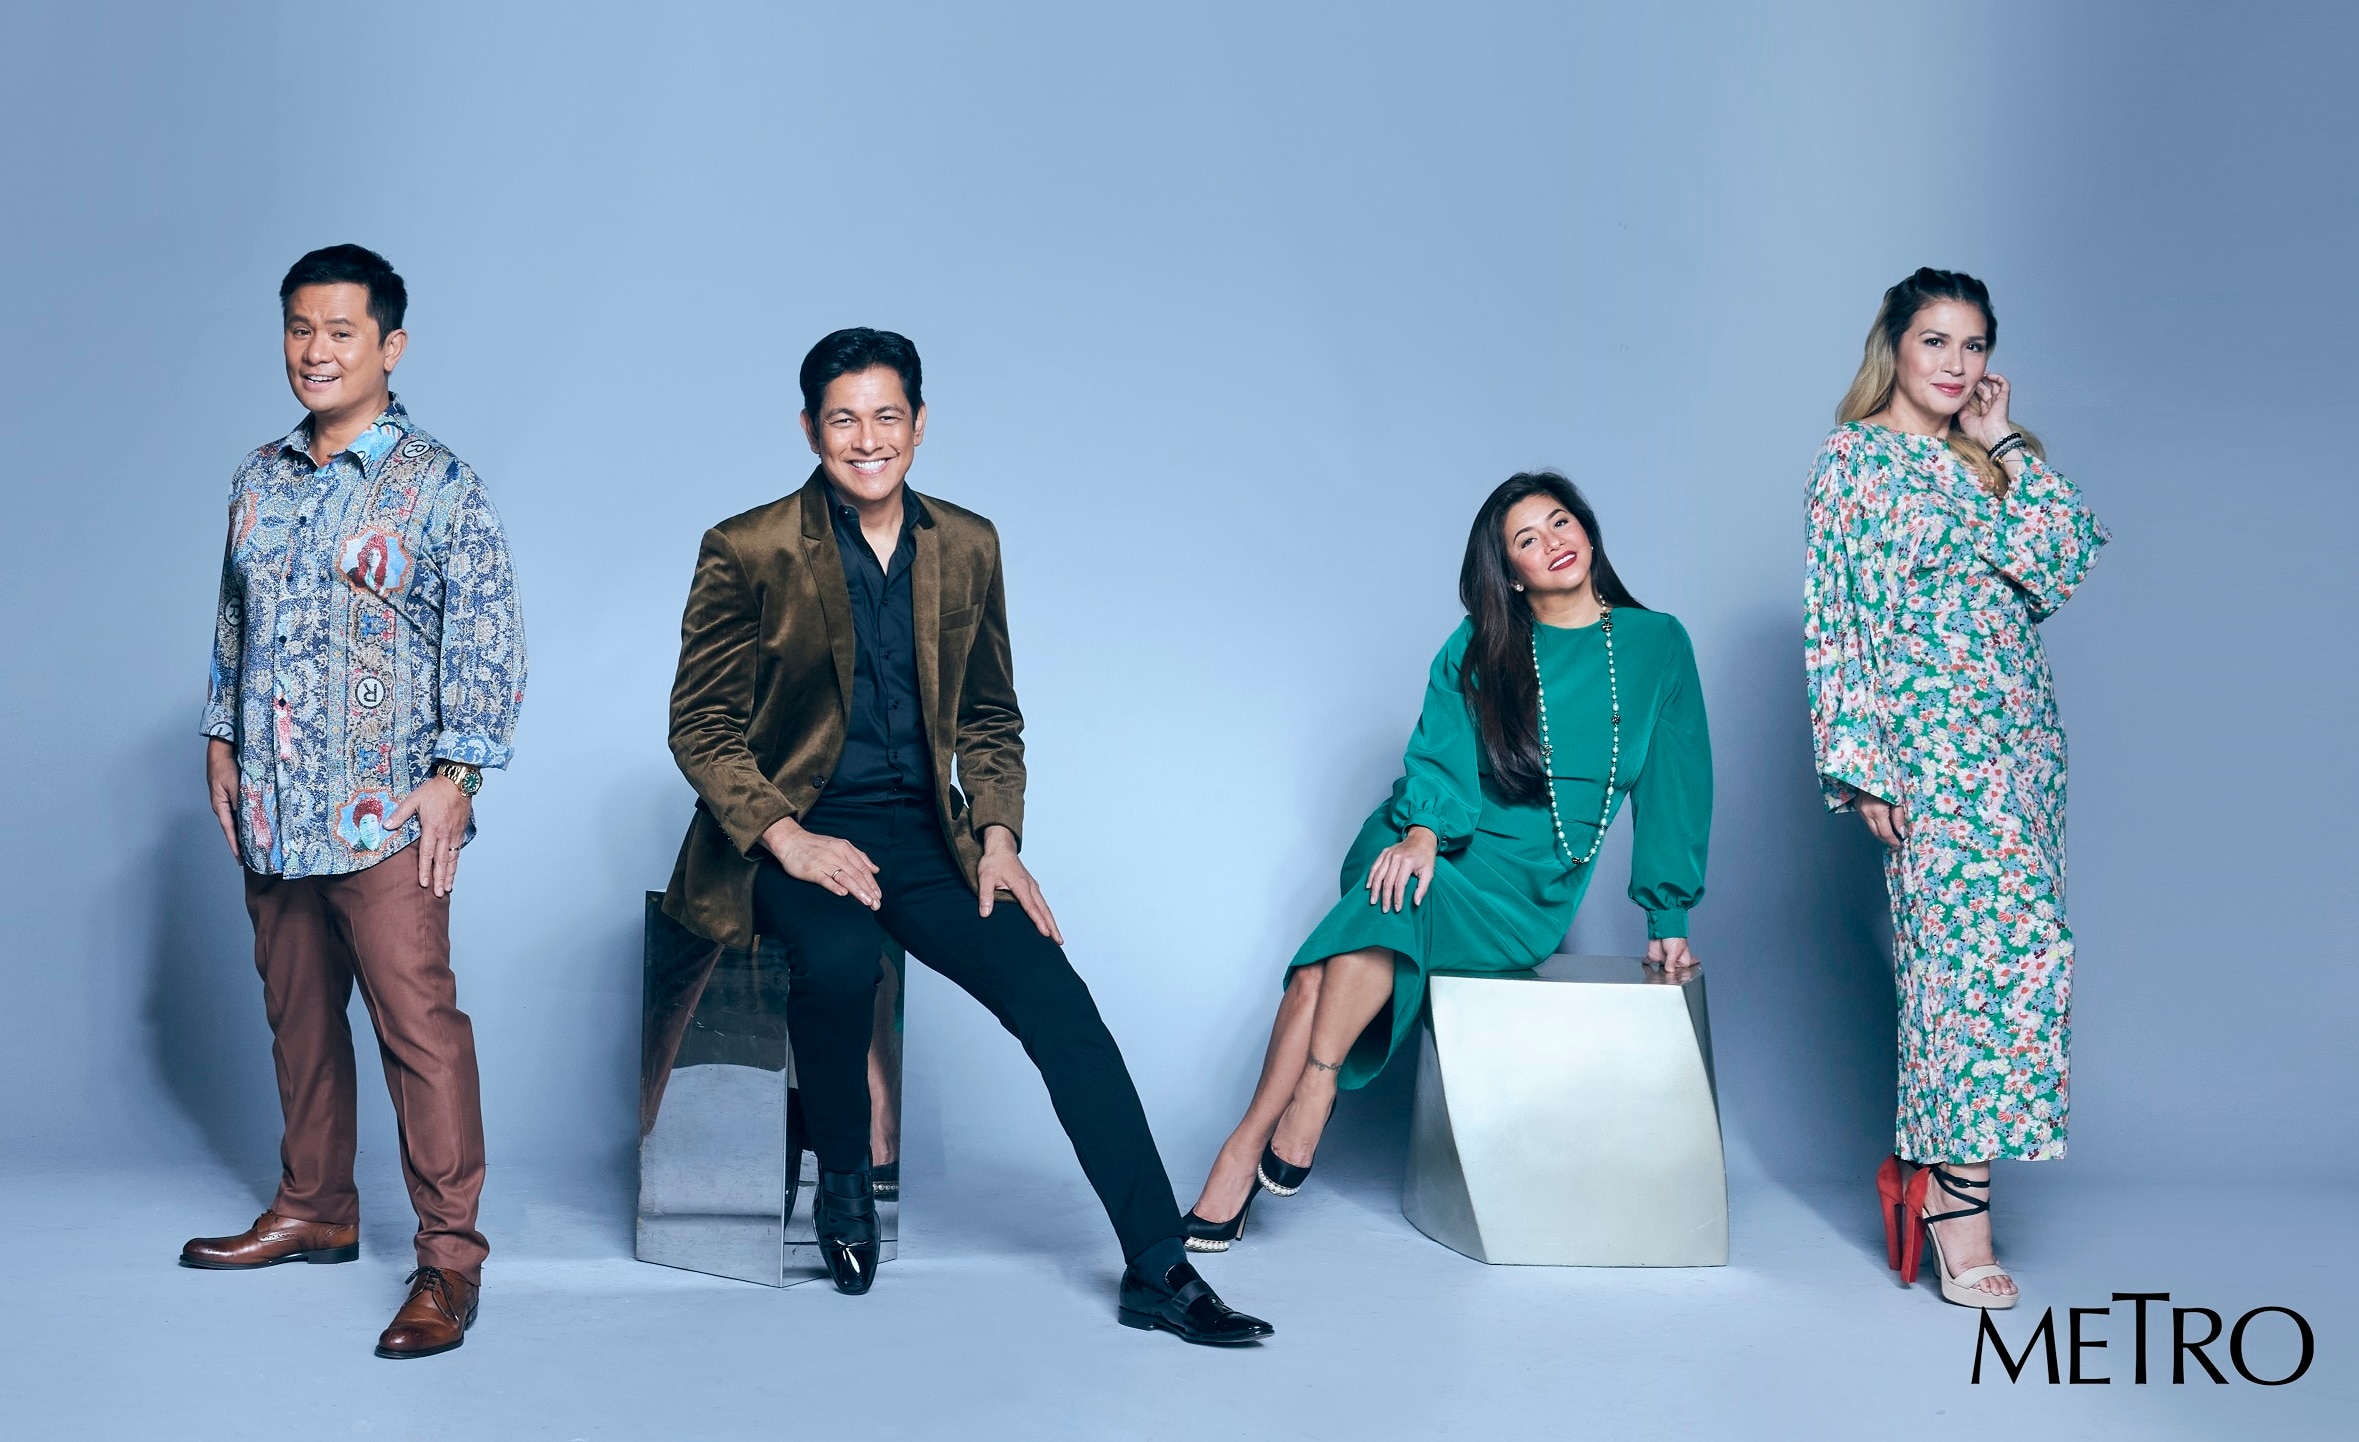 Metro marks the "ASAP Kapamilya Forever Day" with a special photo shoot